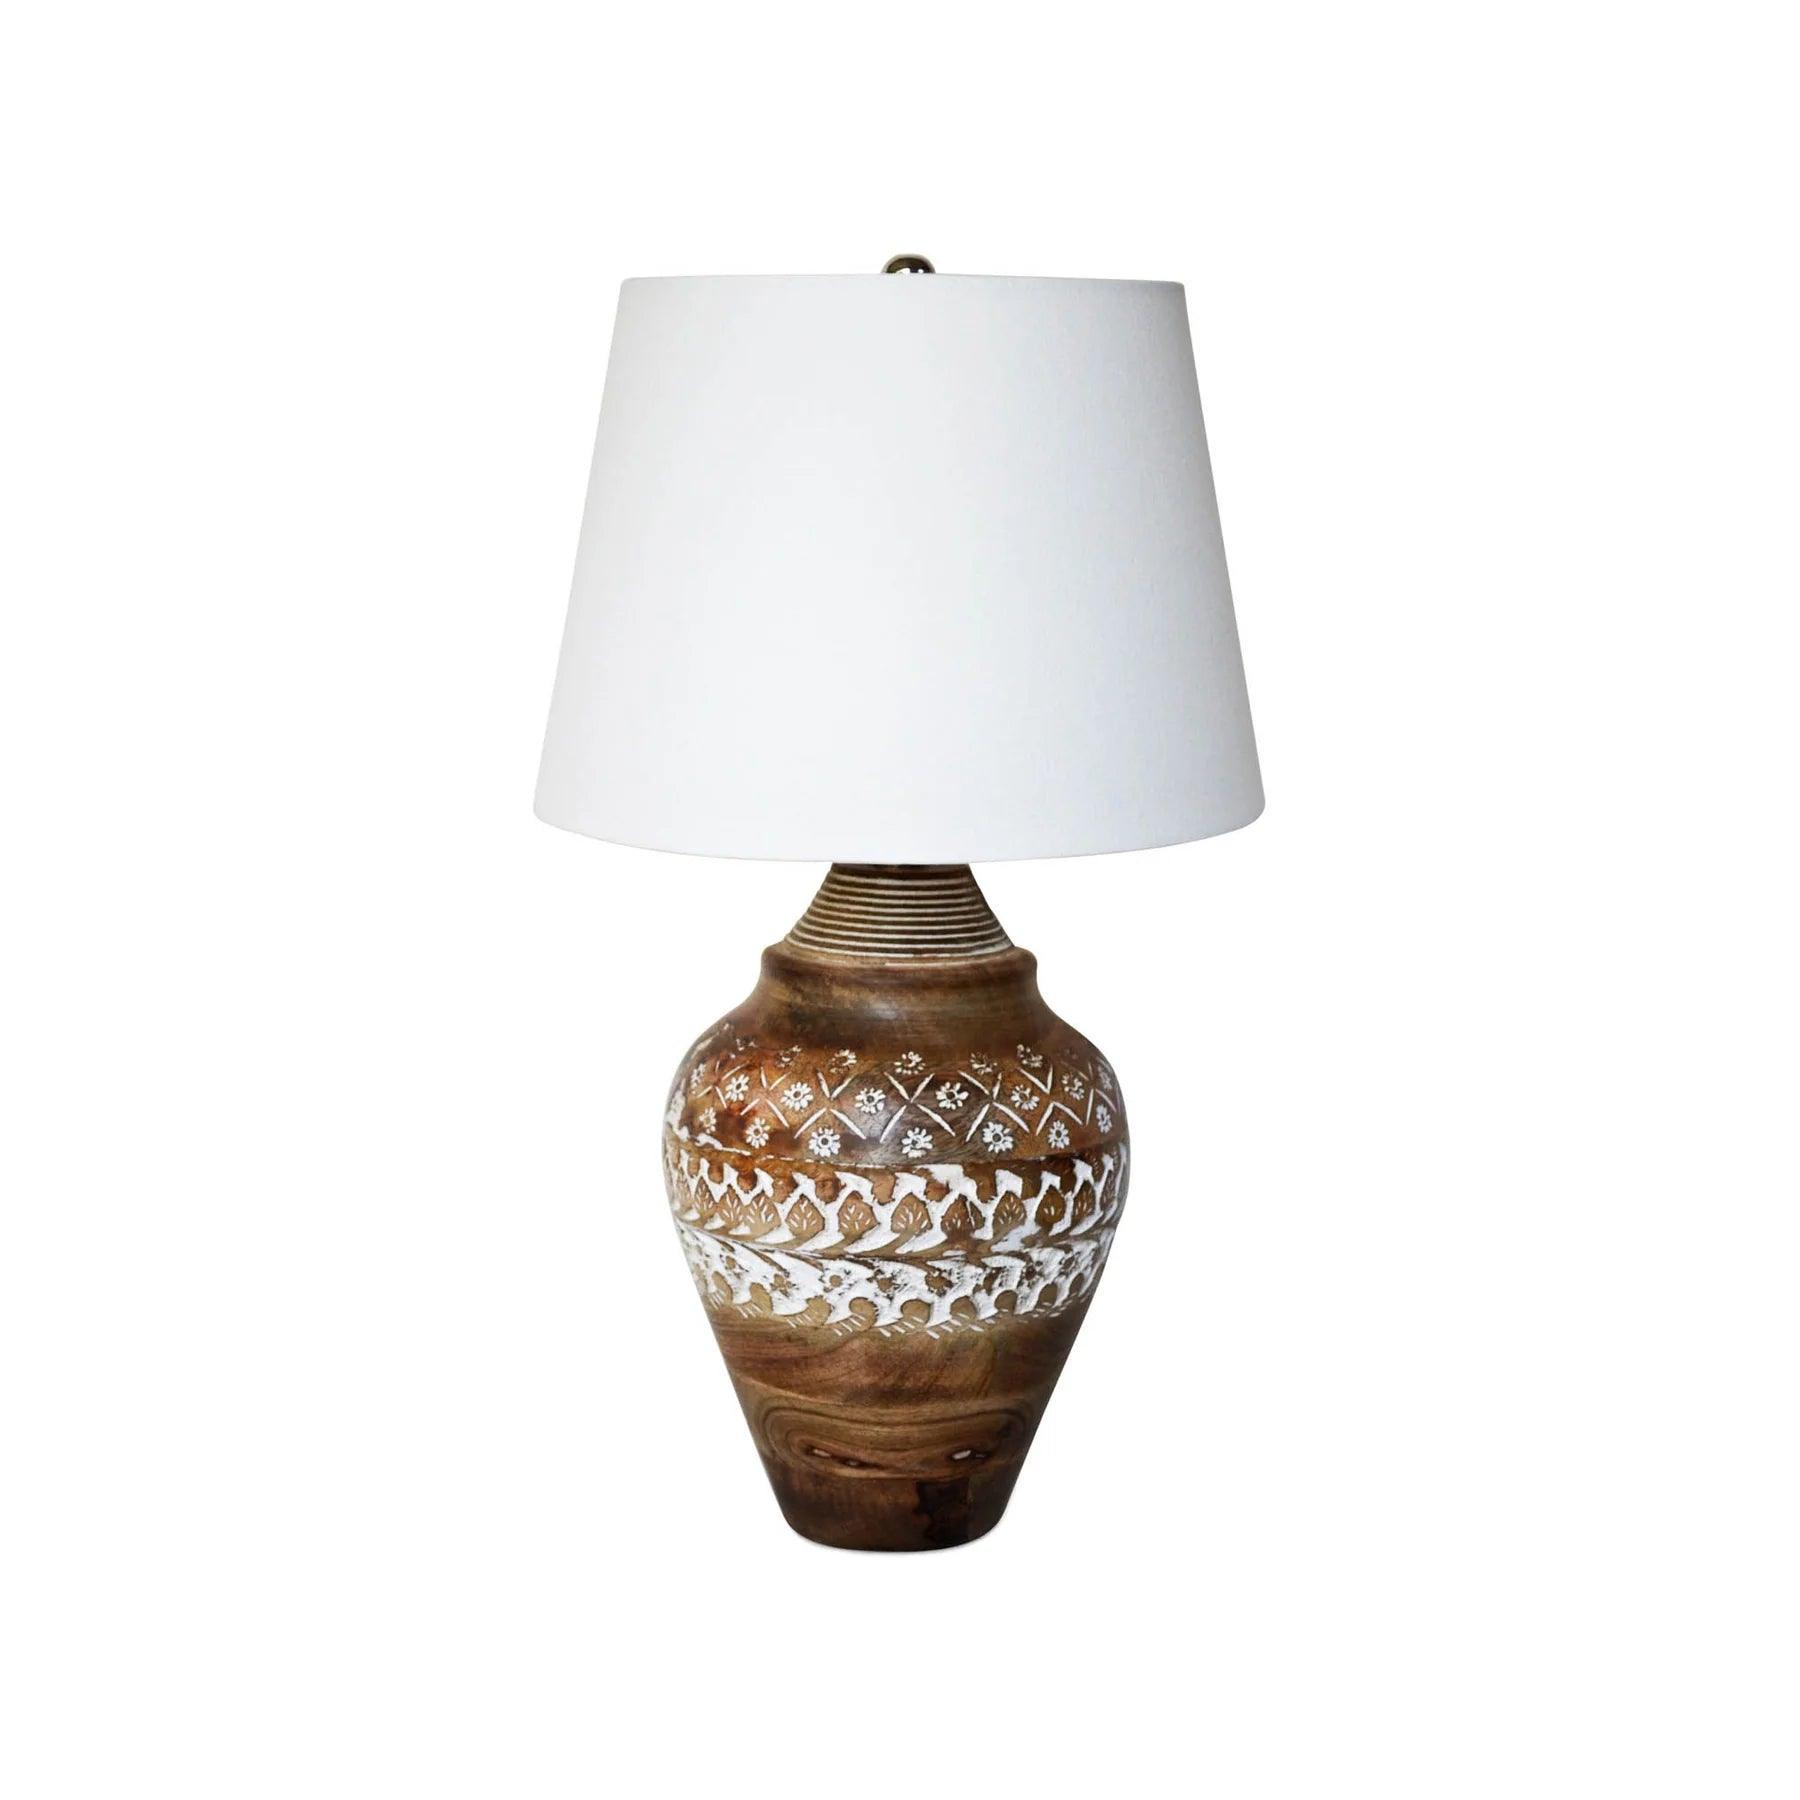 SKYE Antique Table Lamp - Northern Interiors